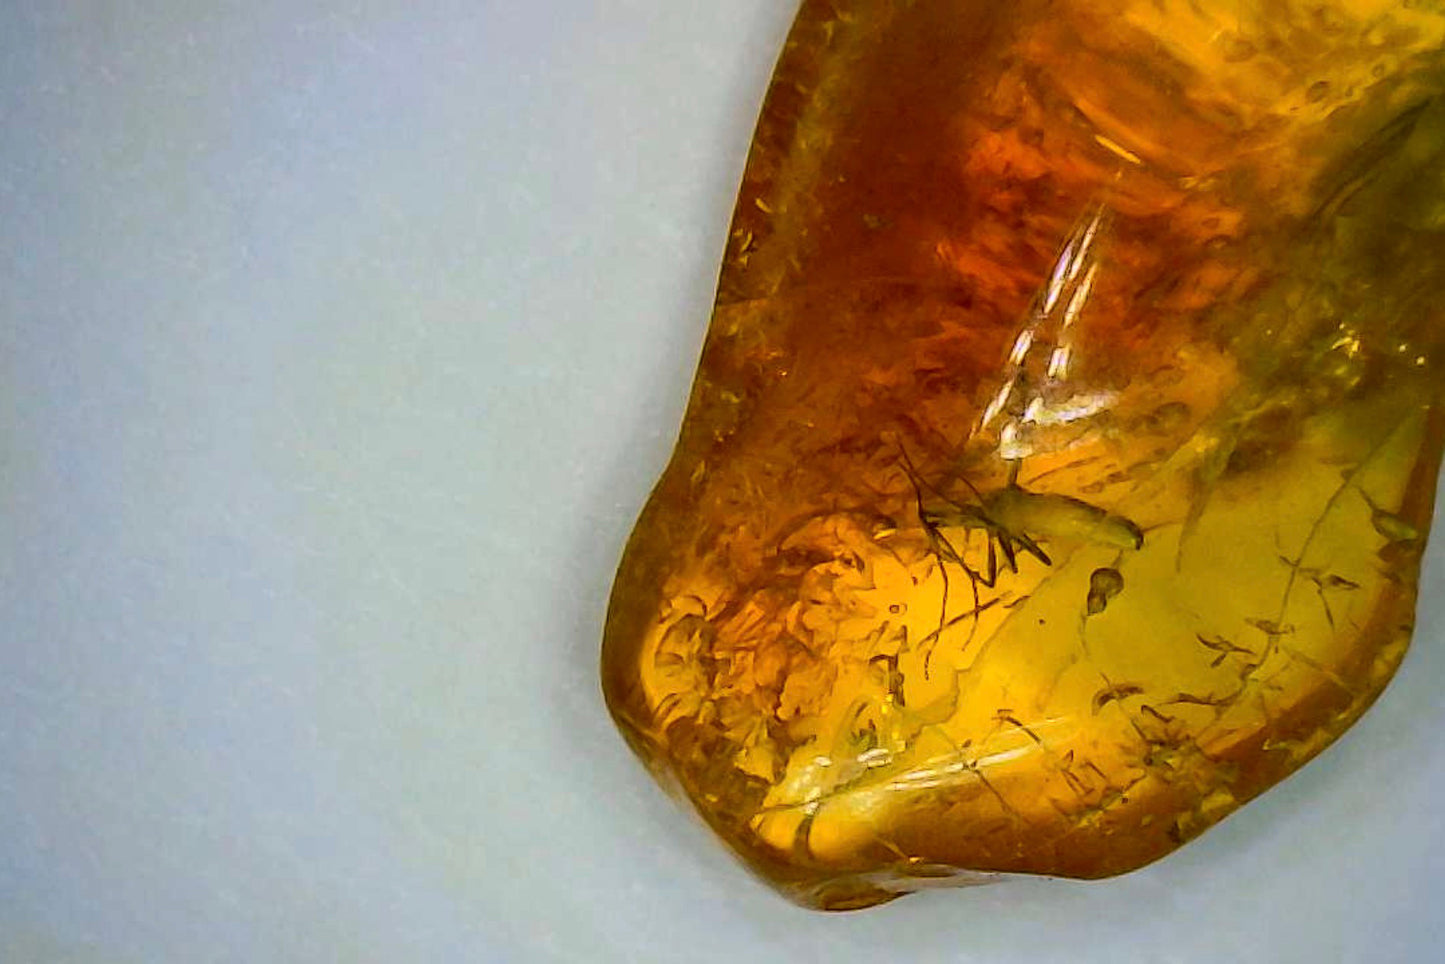 Baltic Amber D with Insect Inclusion